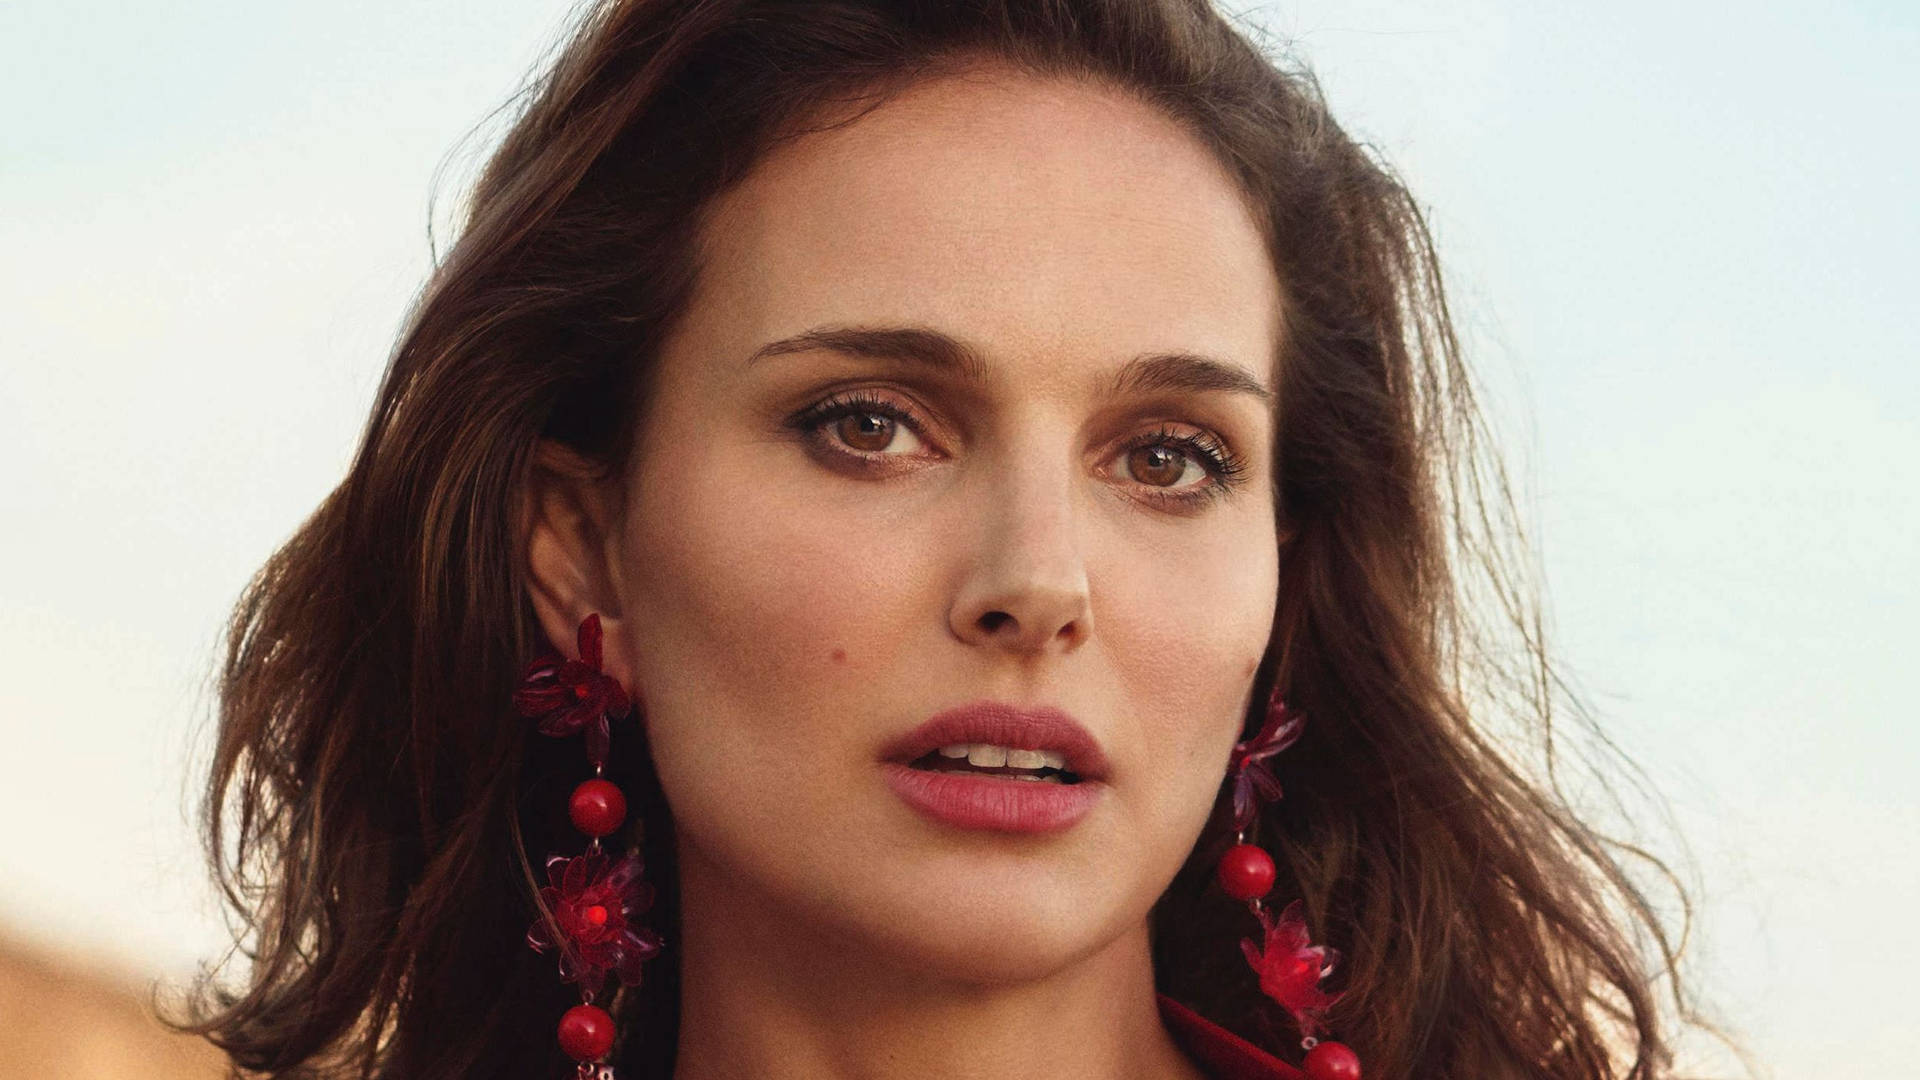 Natalie Portman With Red Earrings Picture